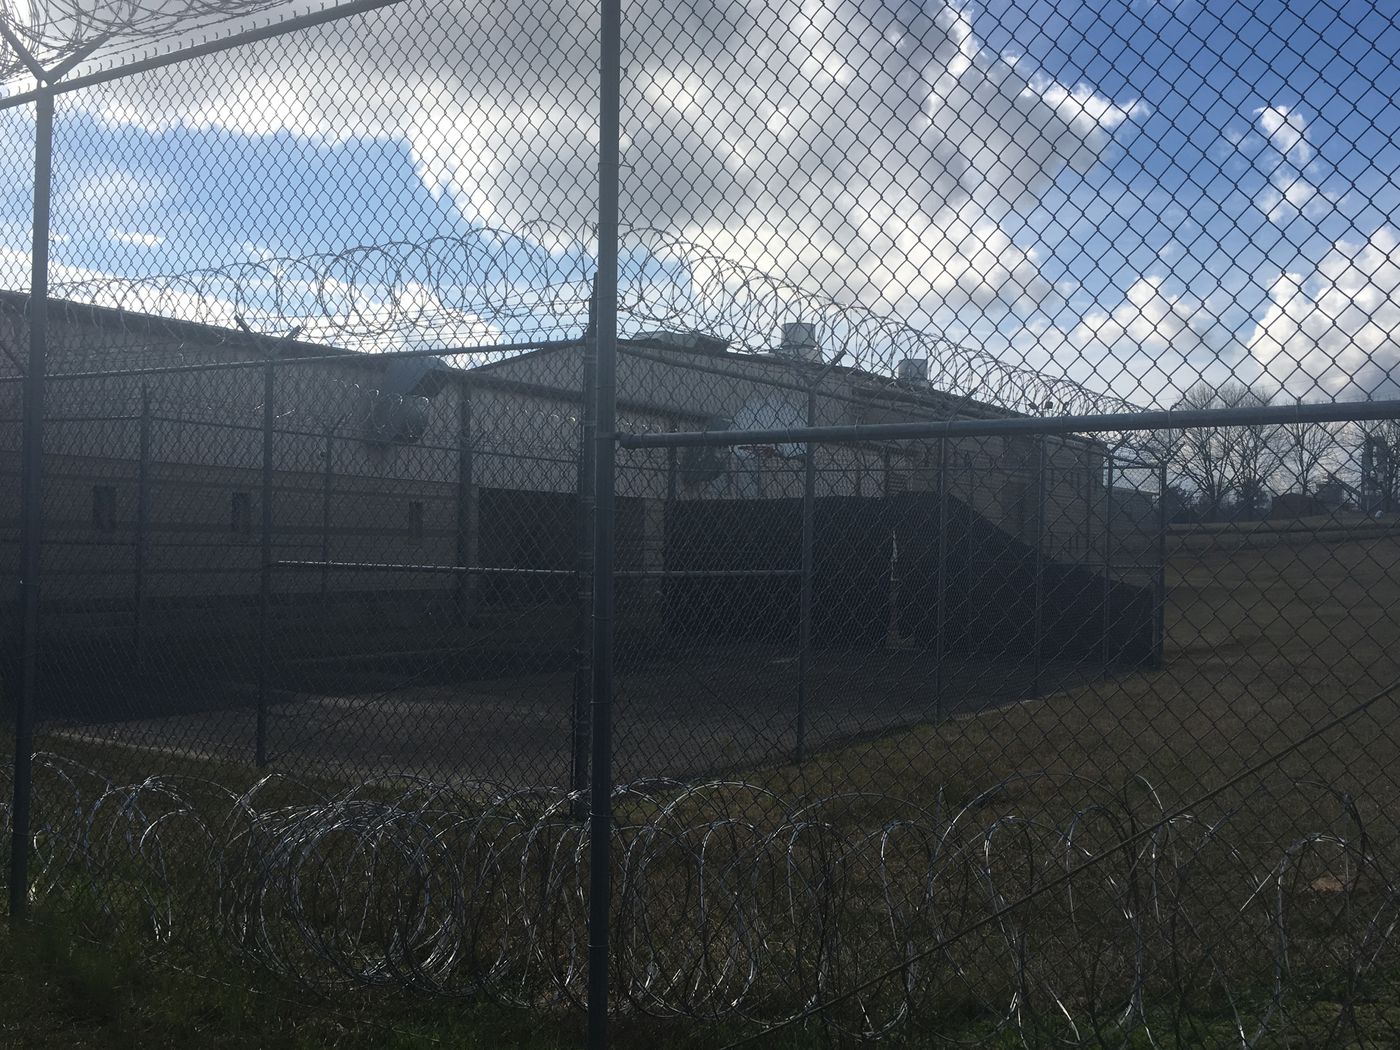 Women's holding facility at the Pike County Jail. Source: WLBT